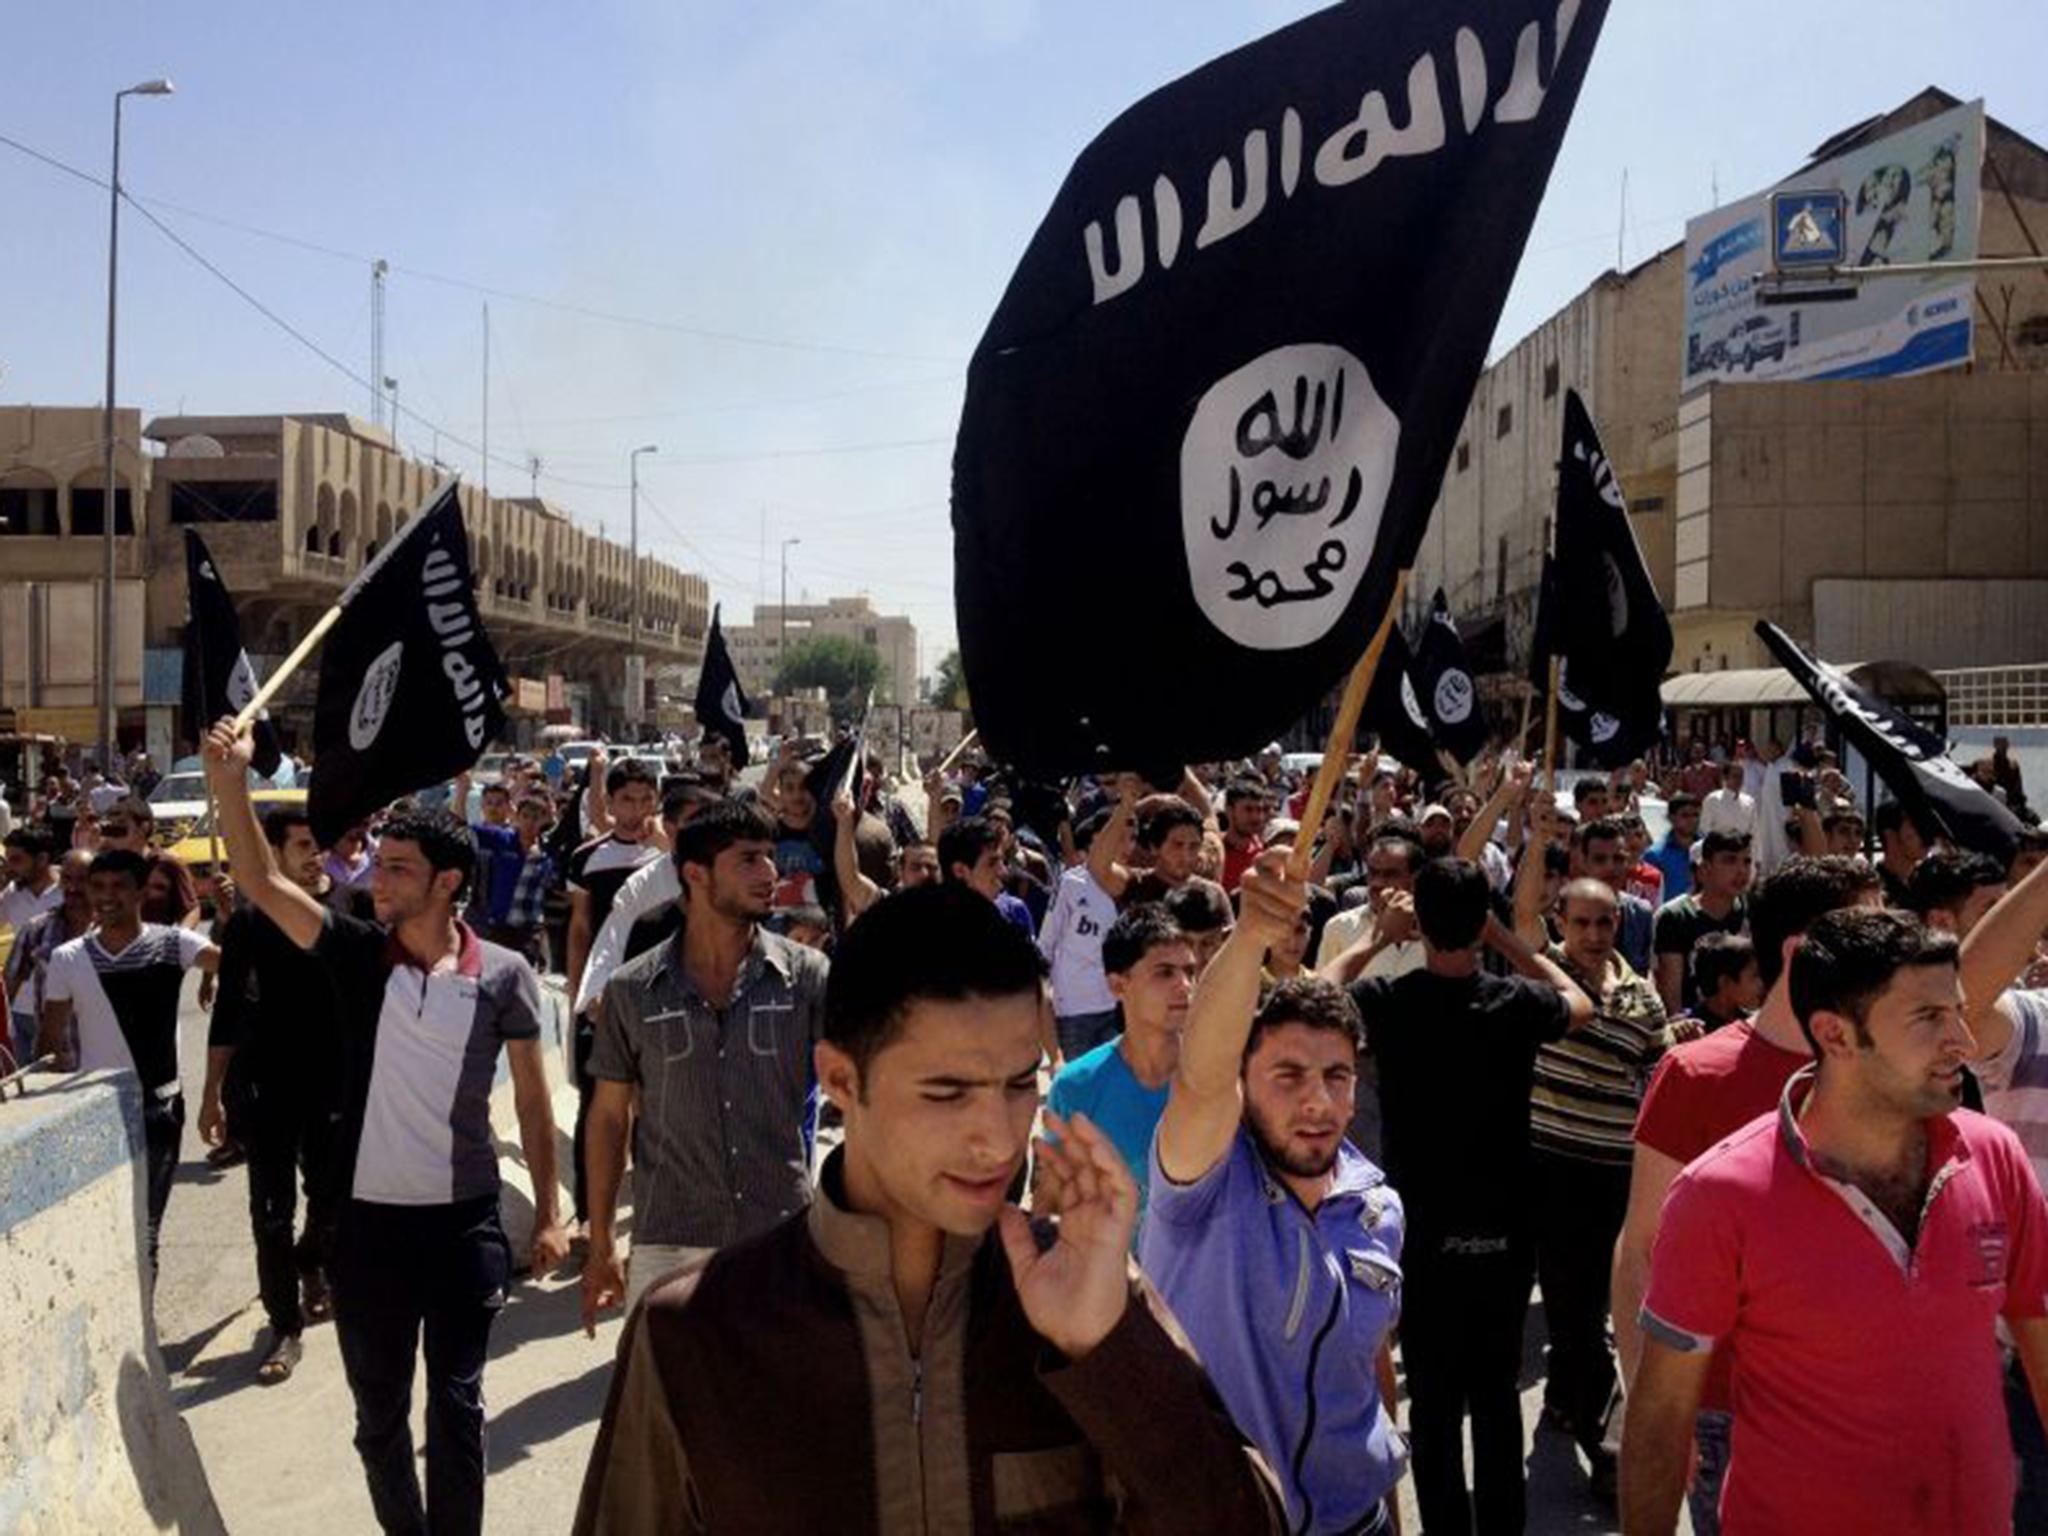 By any other name: Isis supporters march in Mosul - but what should we call the extremist ‘caliphate’?